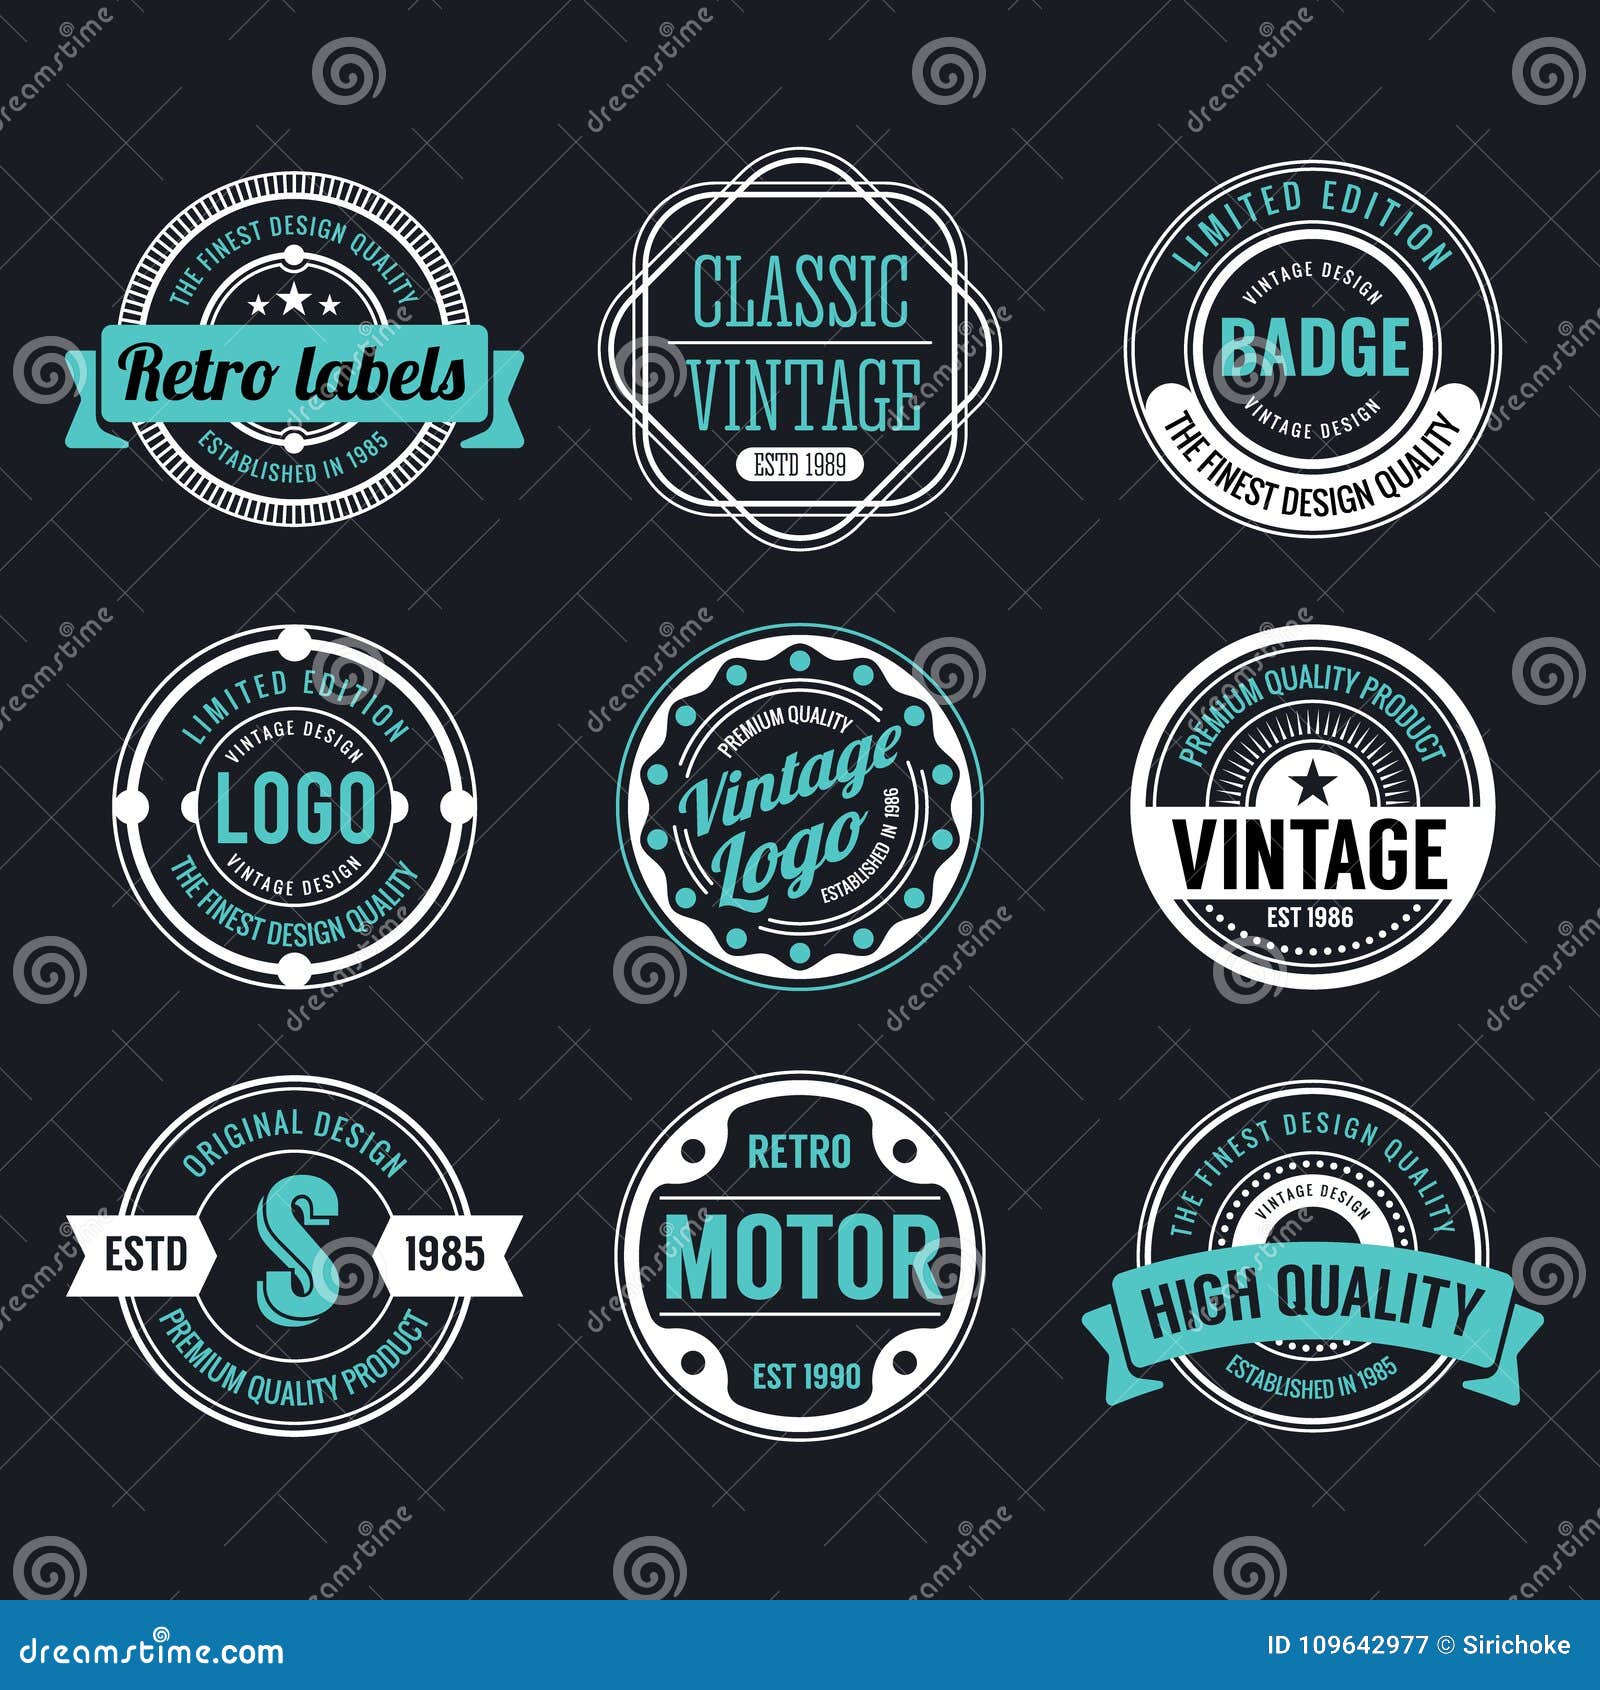 Circle Vintage and Retro Badge Design Stock Vector - Illustration of ...